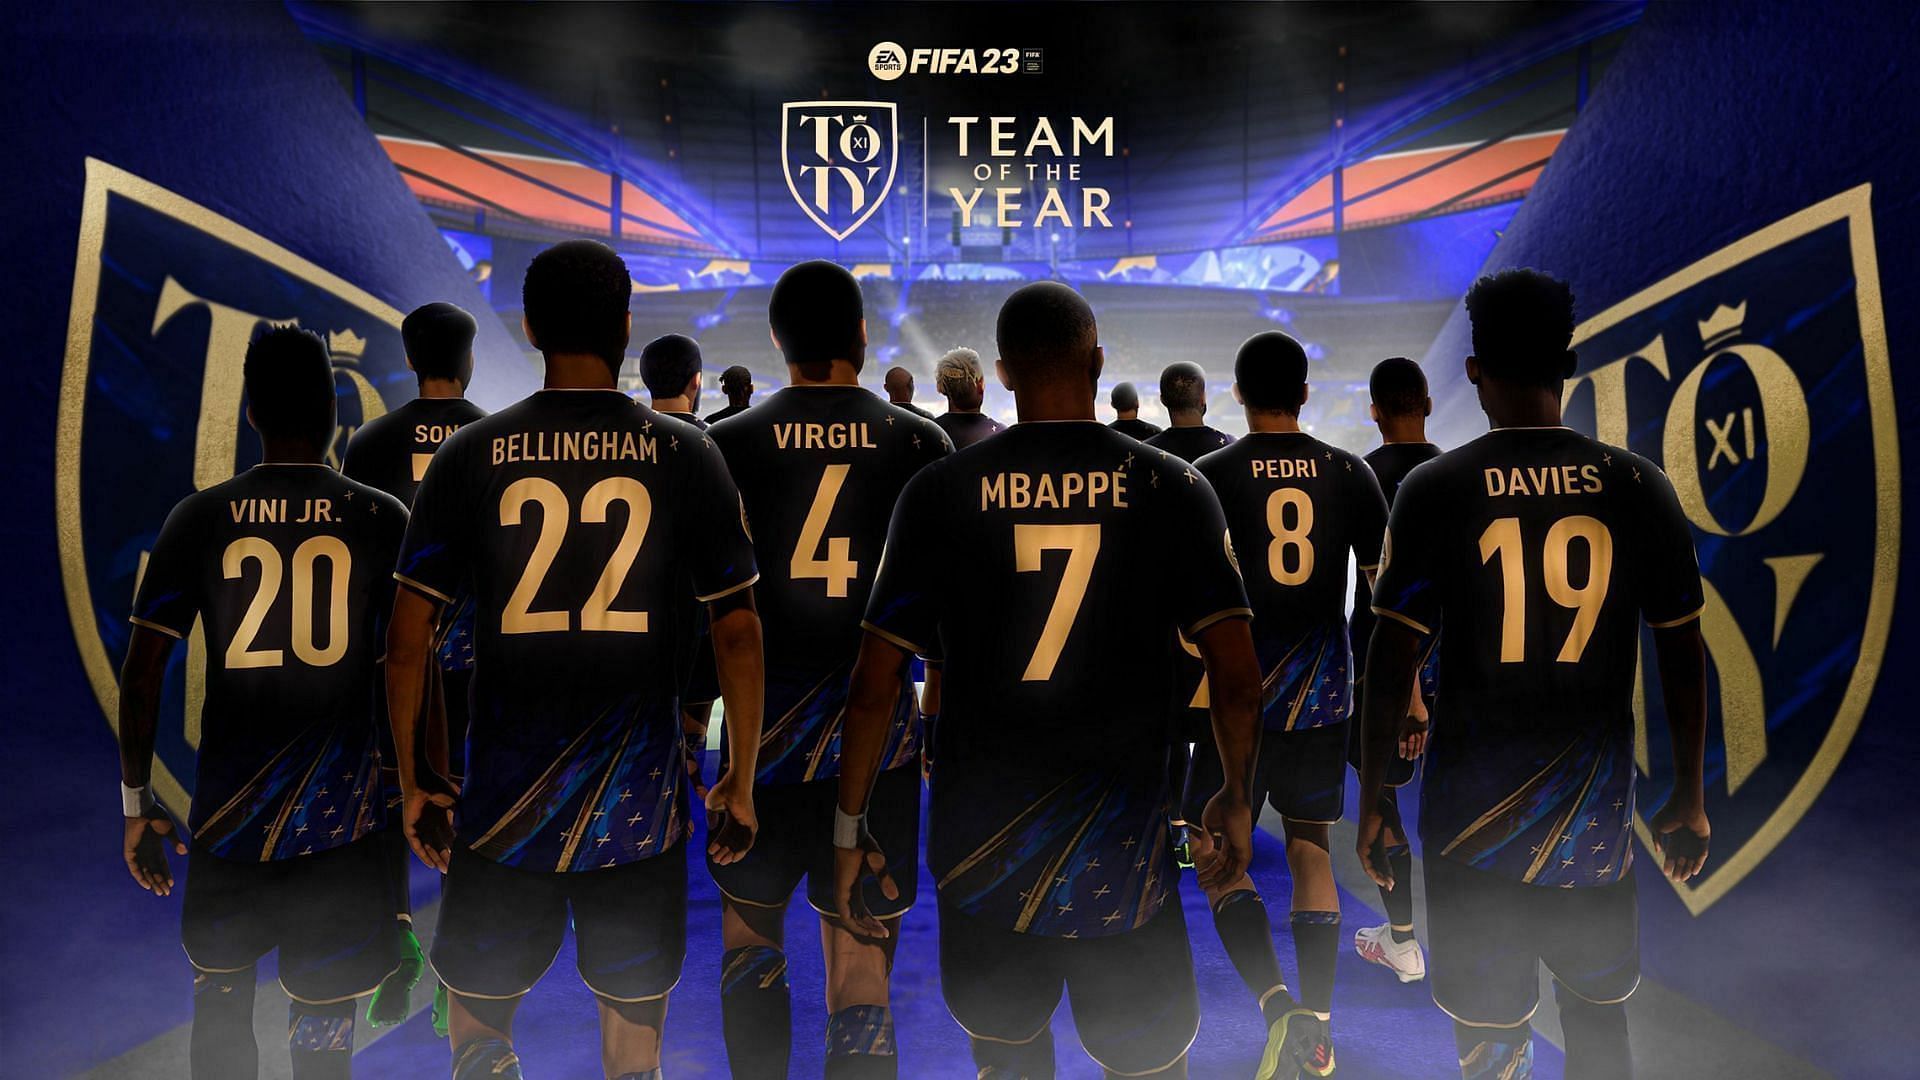 FIFA 23 Team of the Year Promo Event